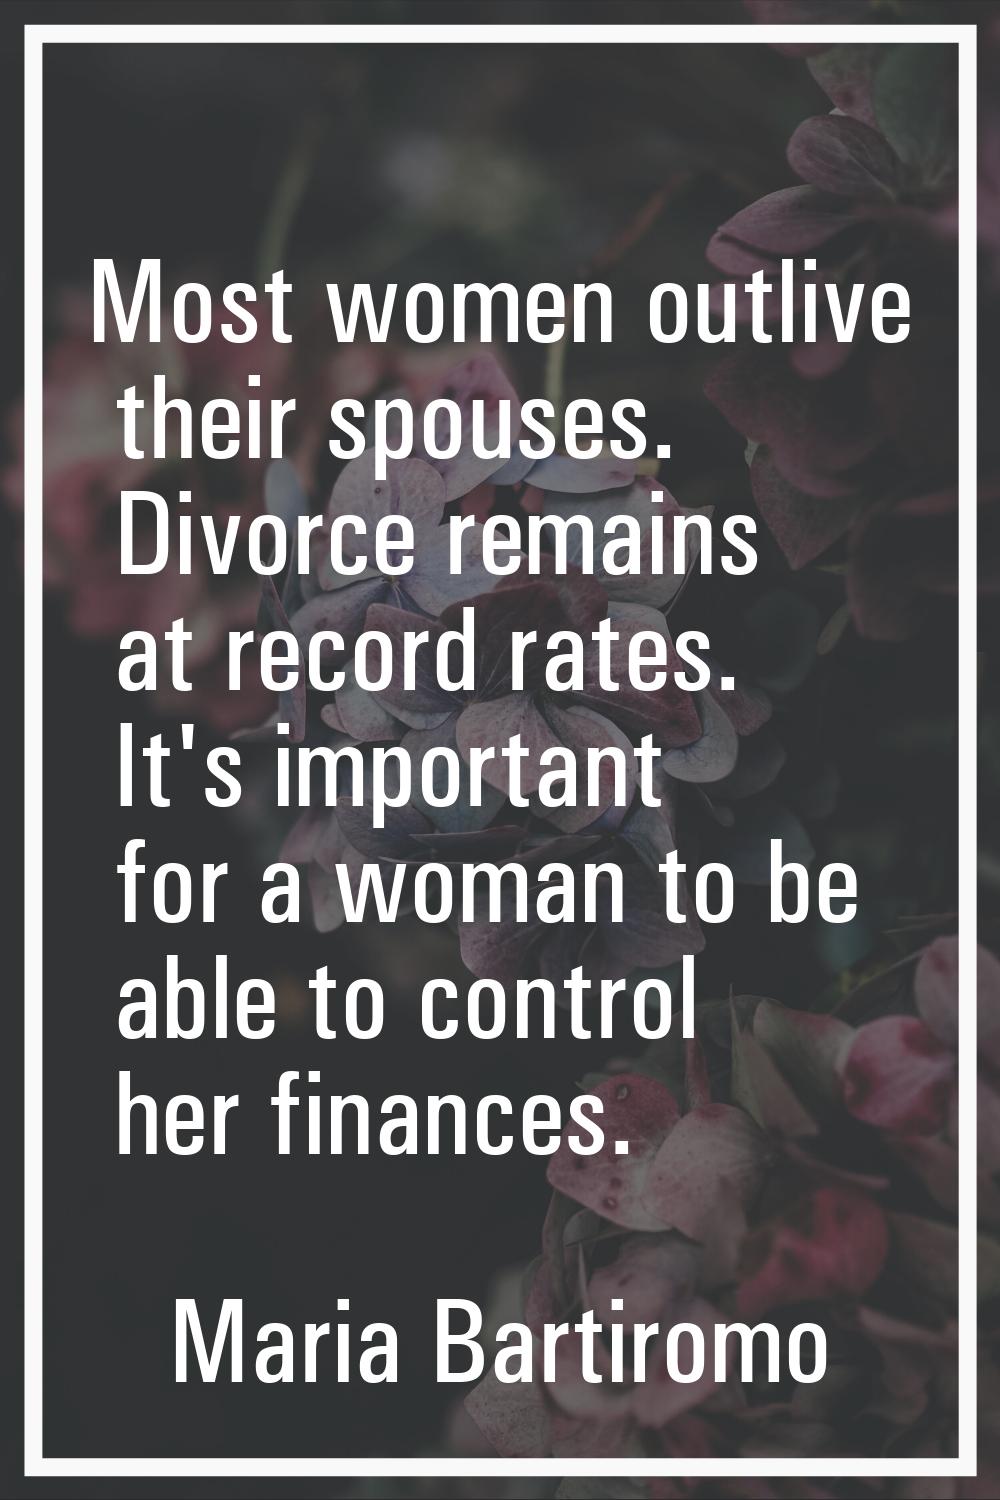 Most women outlive their spouses. Divorce remains at record rates. It's important for a woman to be